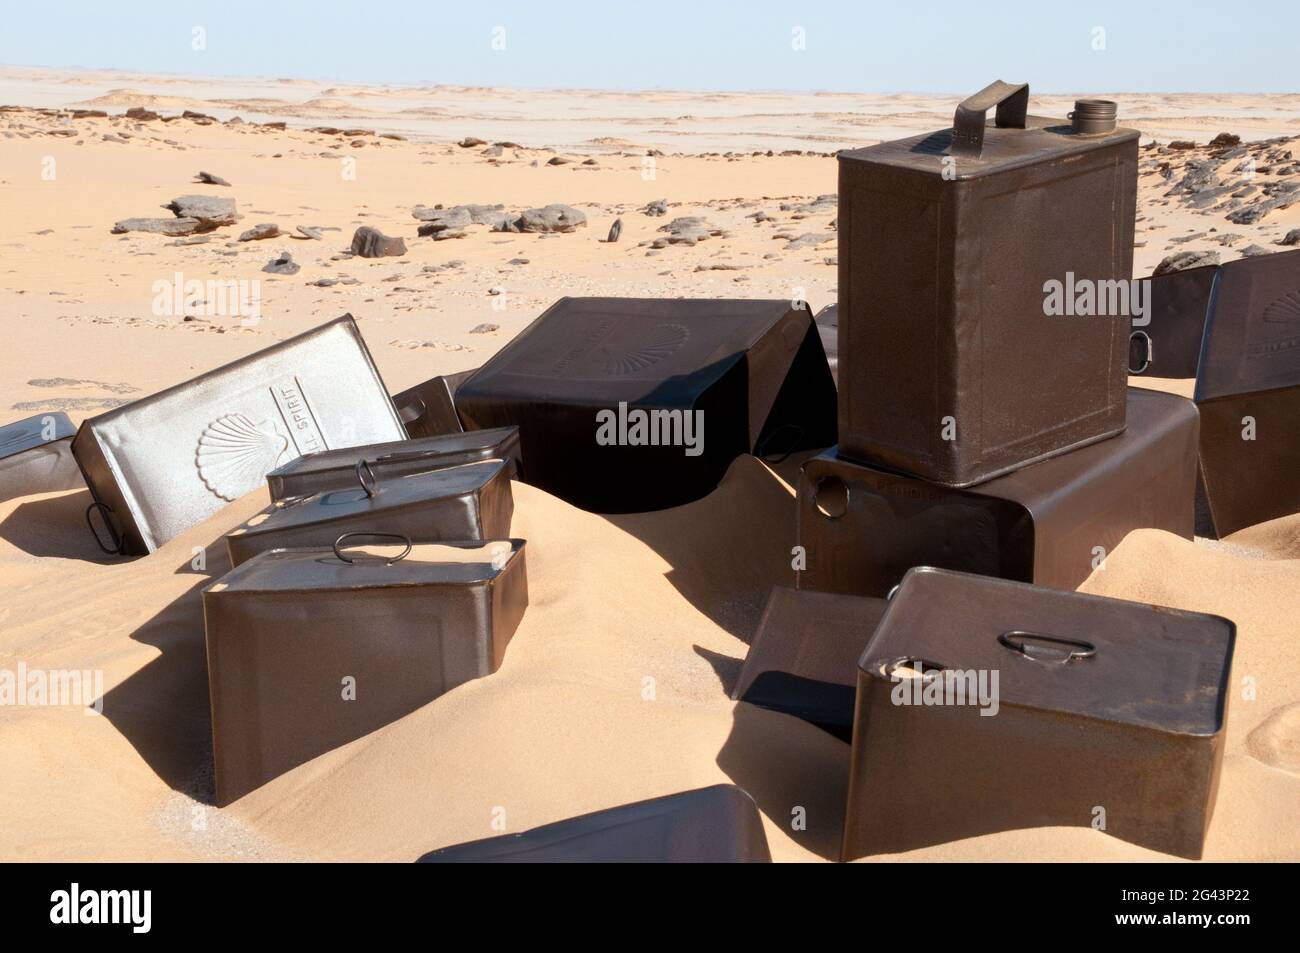 Empty military jerry cans dating back to Britain's Long Range Desert Group in World War Two, Western Desert (Sahara), Egypt. Stock Photo